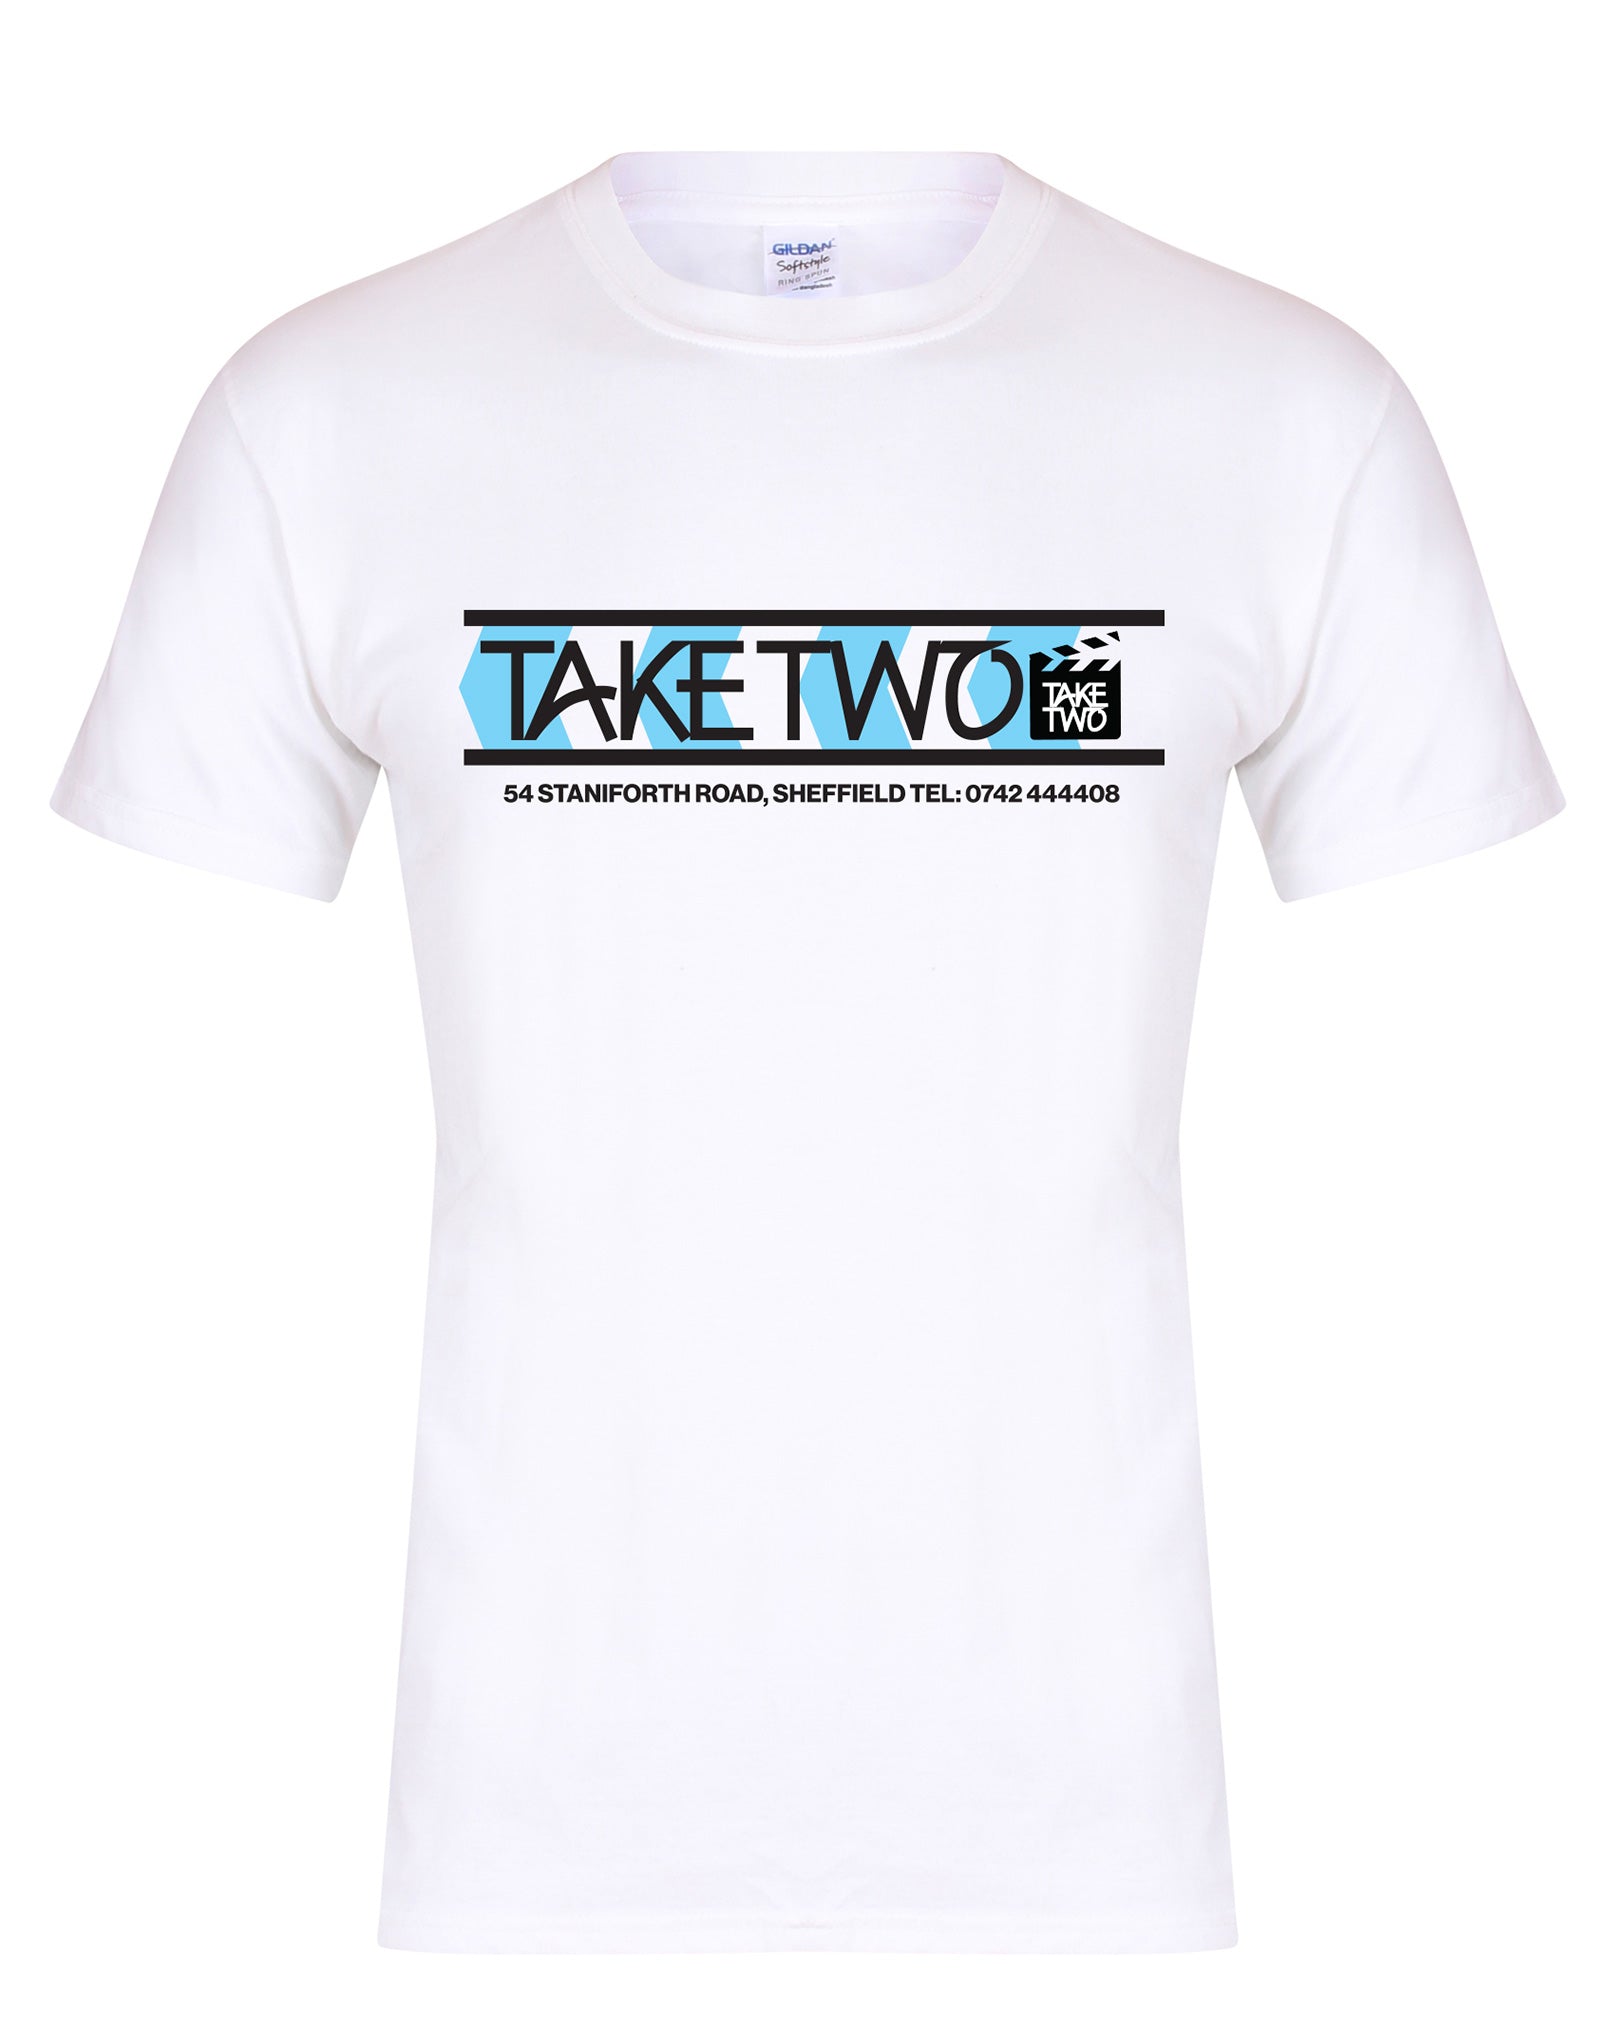 Take Two unisex fit T-shirt - various colours - Dirty Stop Outs